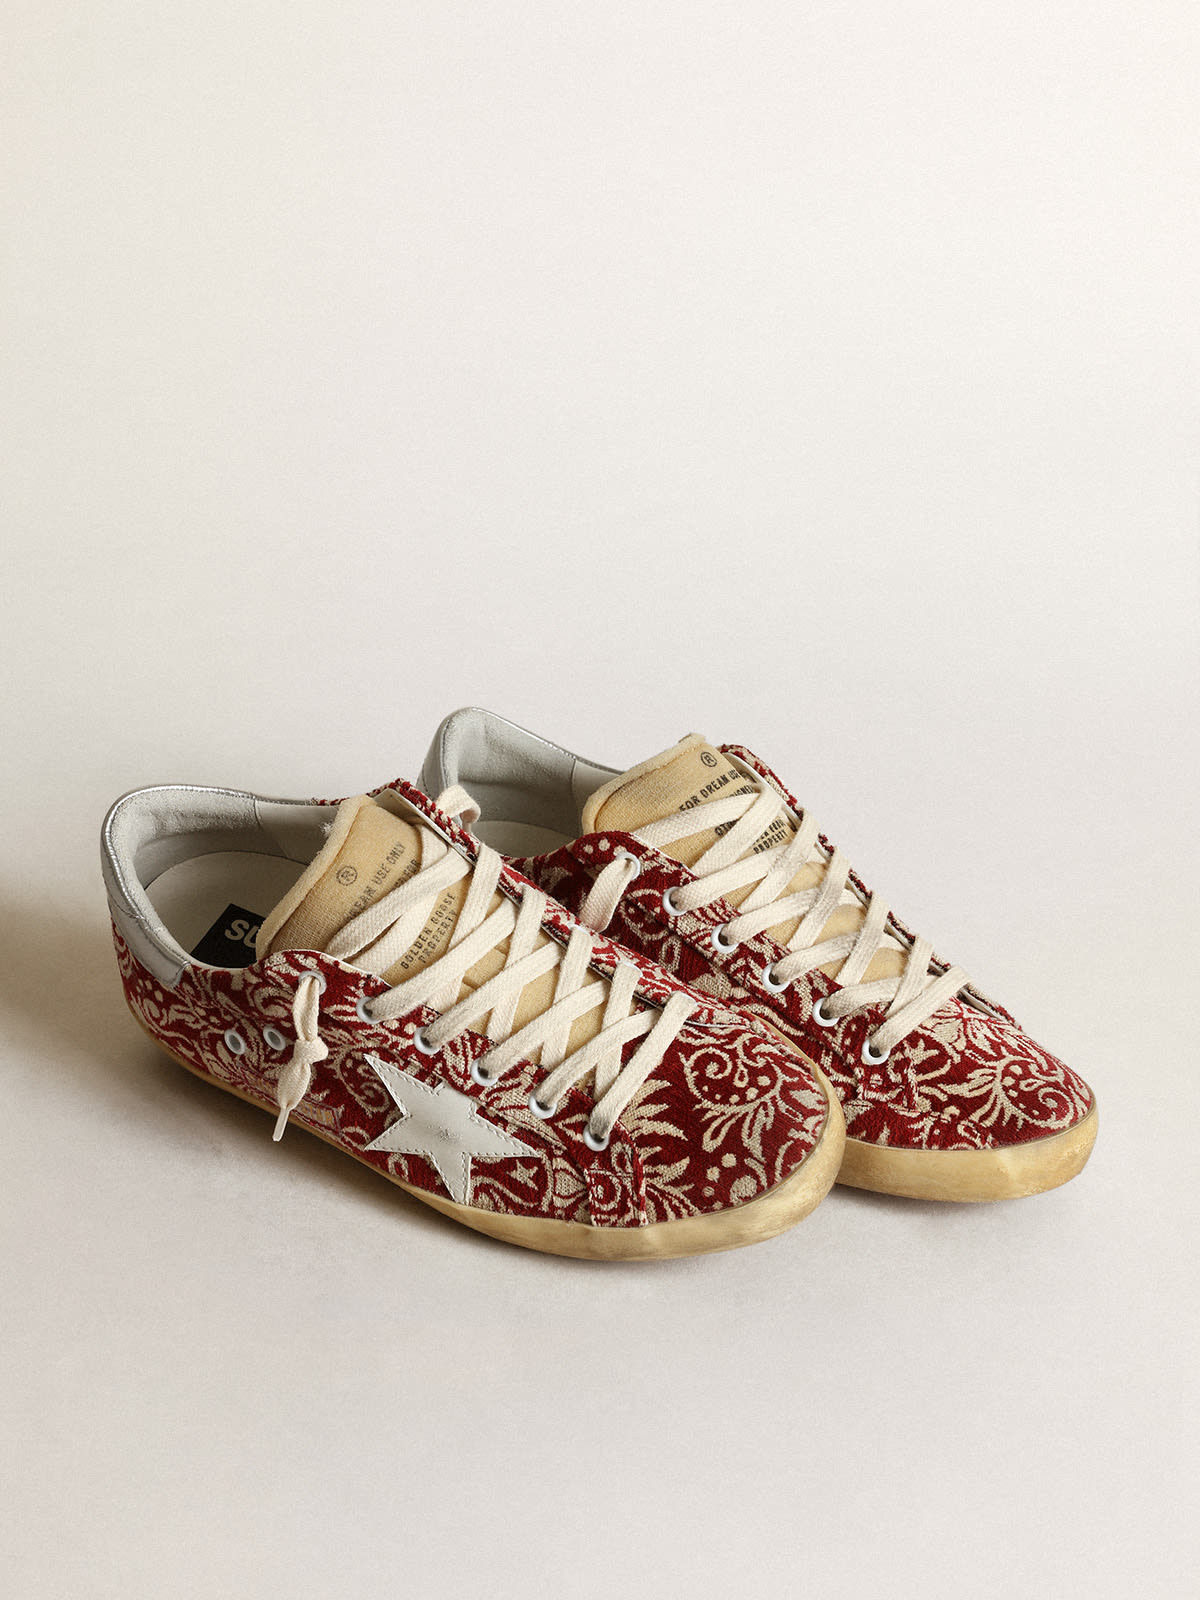 Golden Goose - Women's Super-Star in dark red and ivory jacquard fabric in 